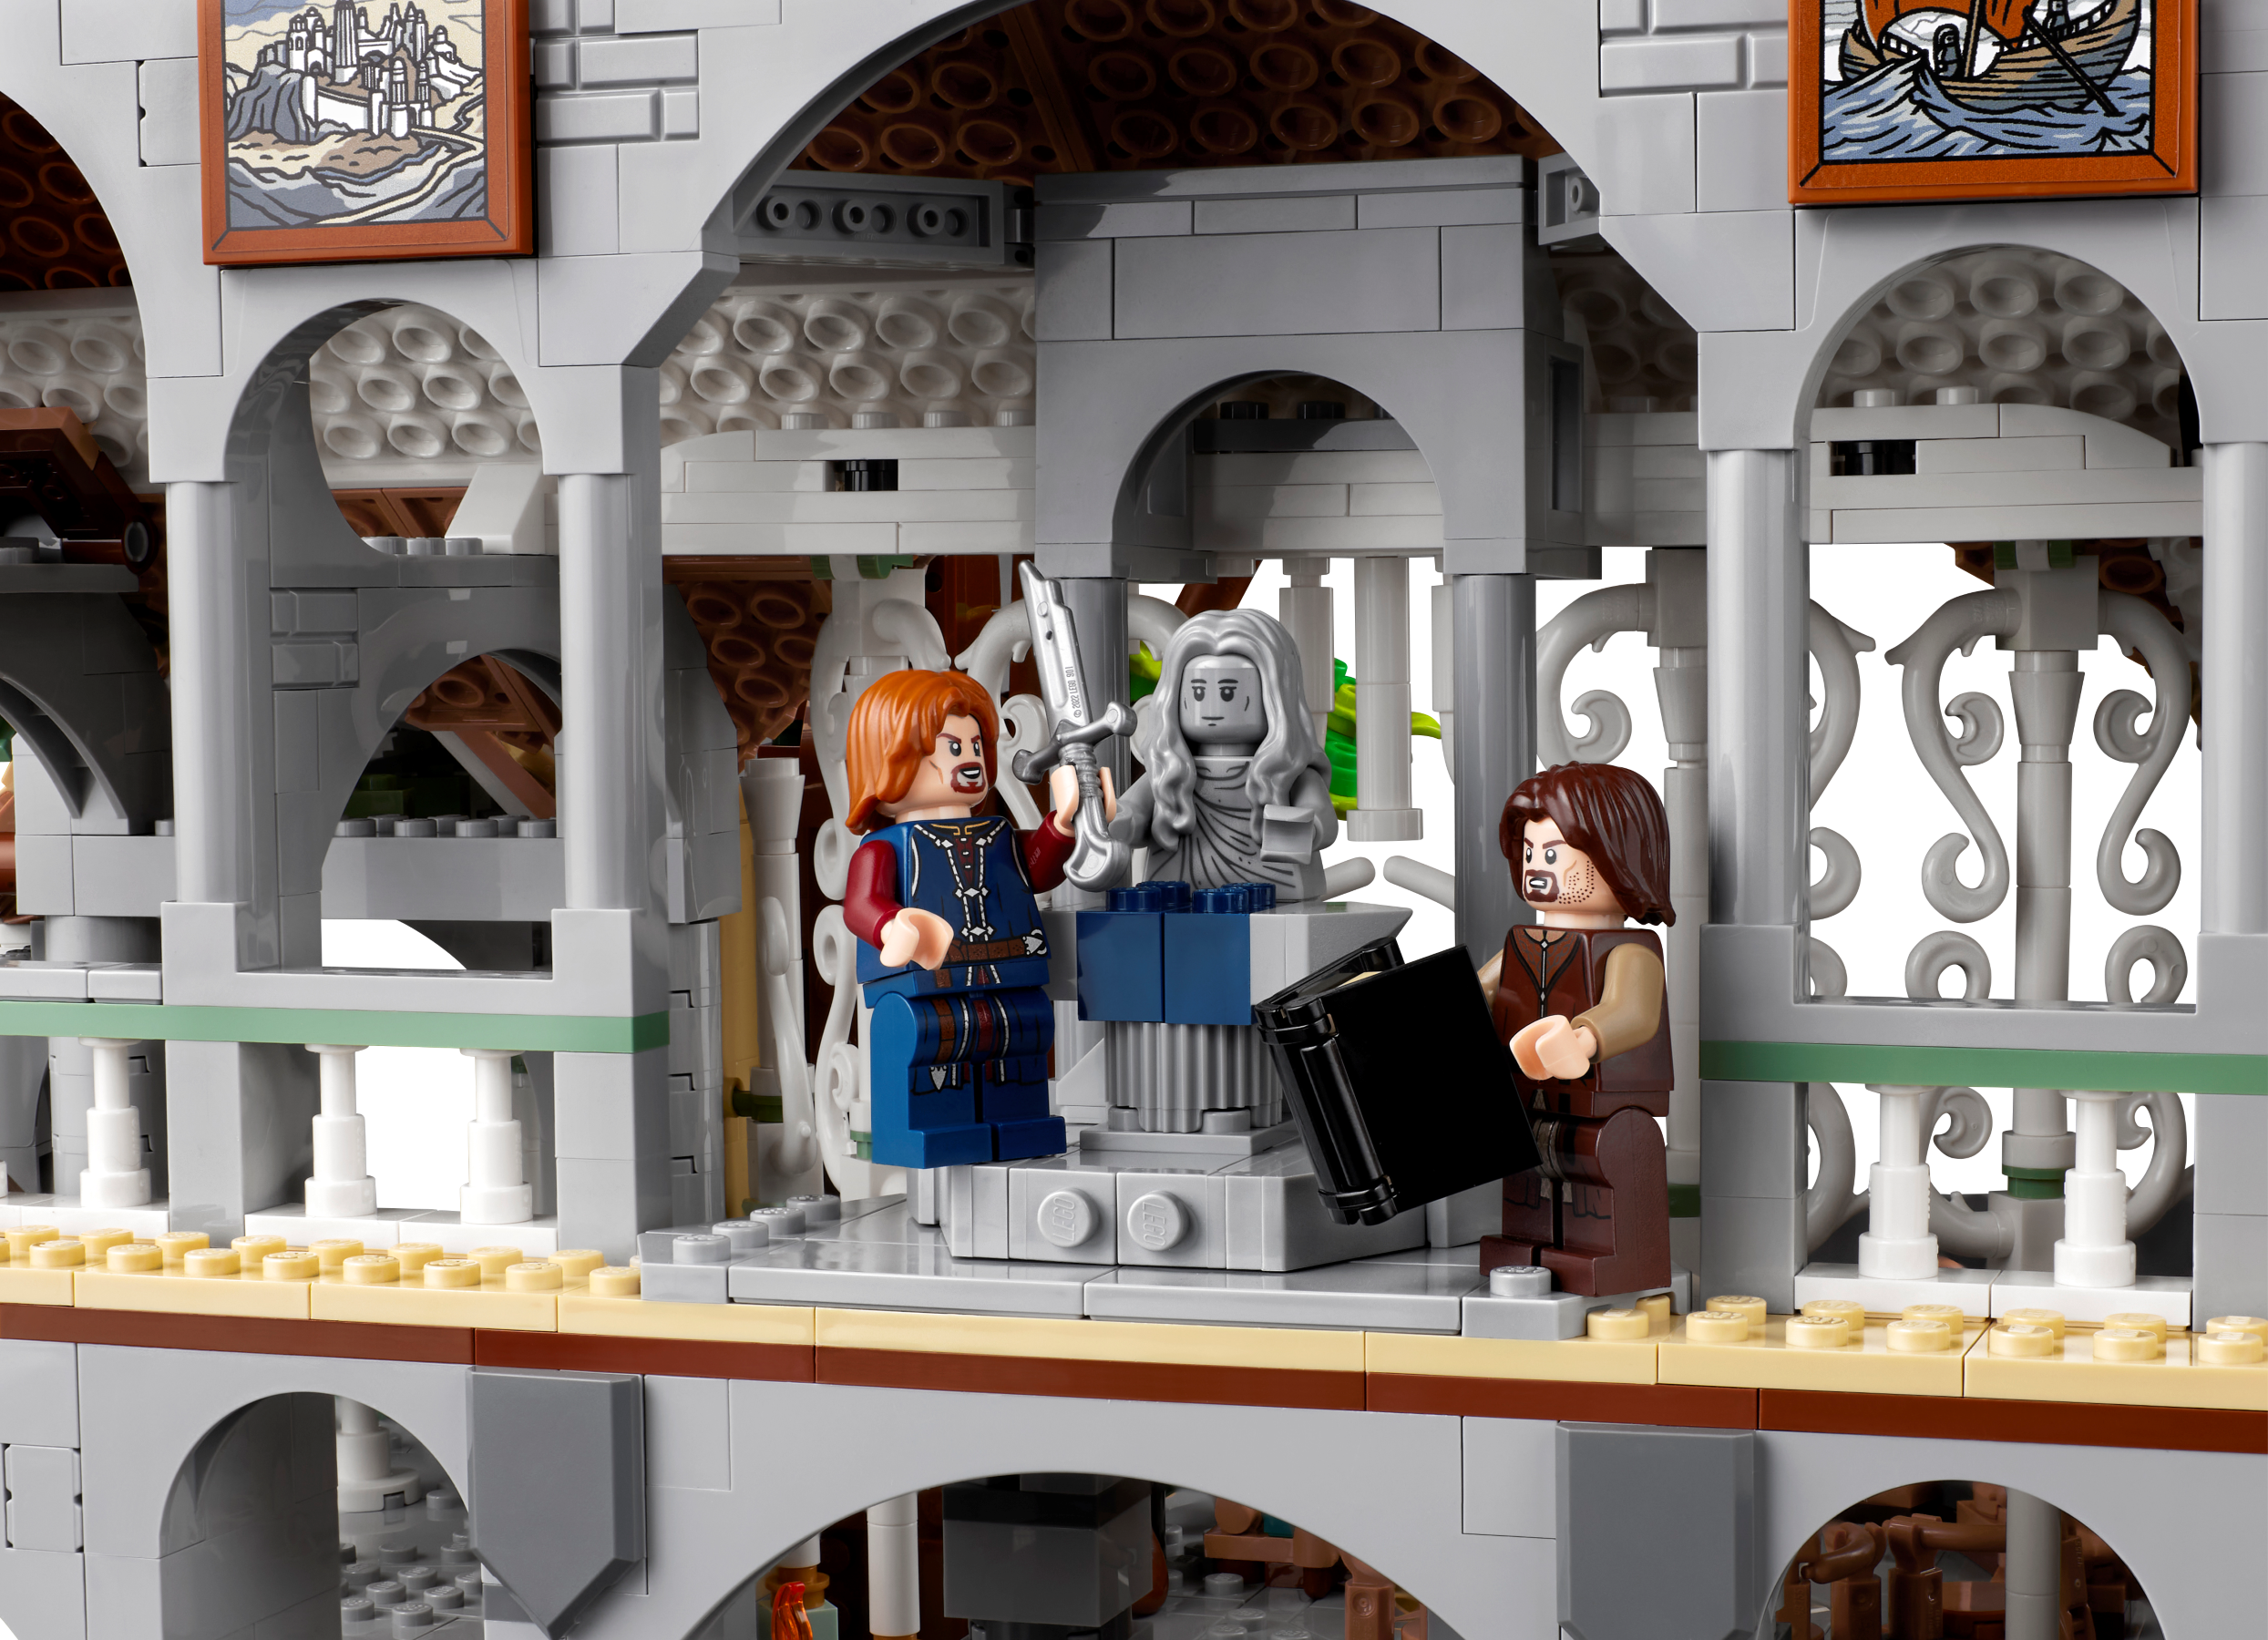 Check out this 120,000-piece replica Lego Rivendell!